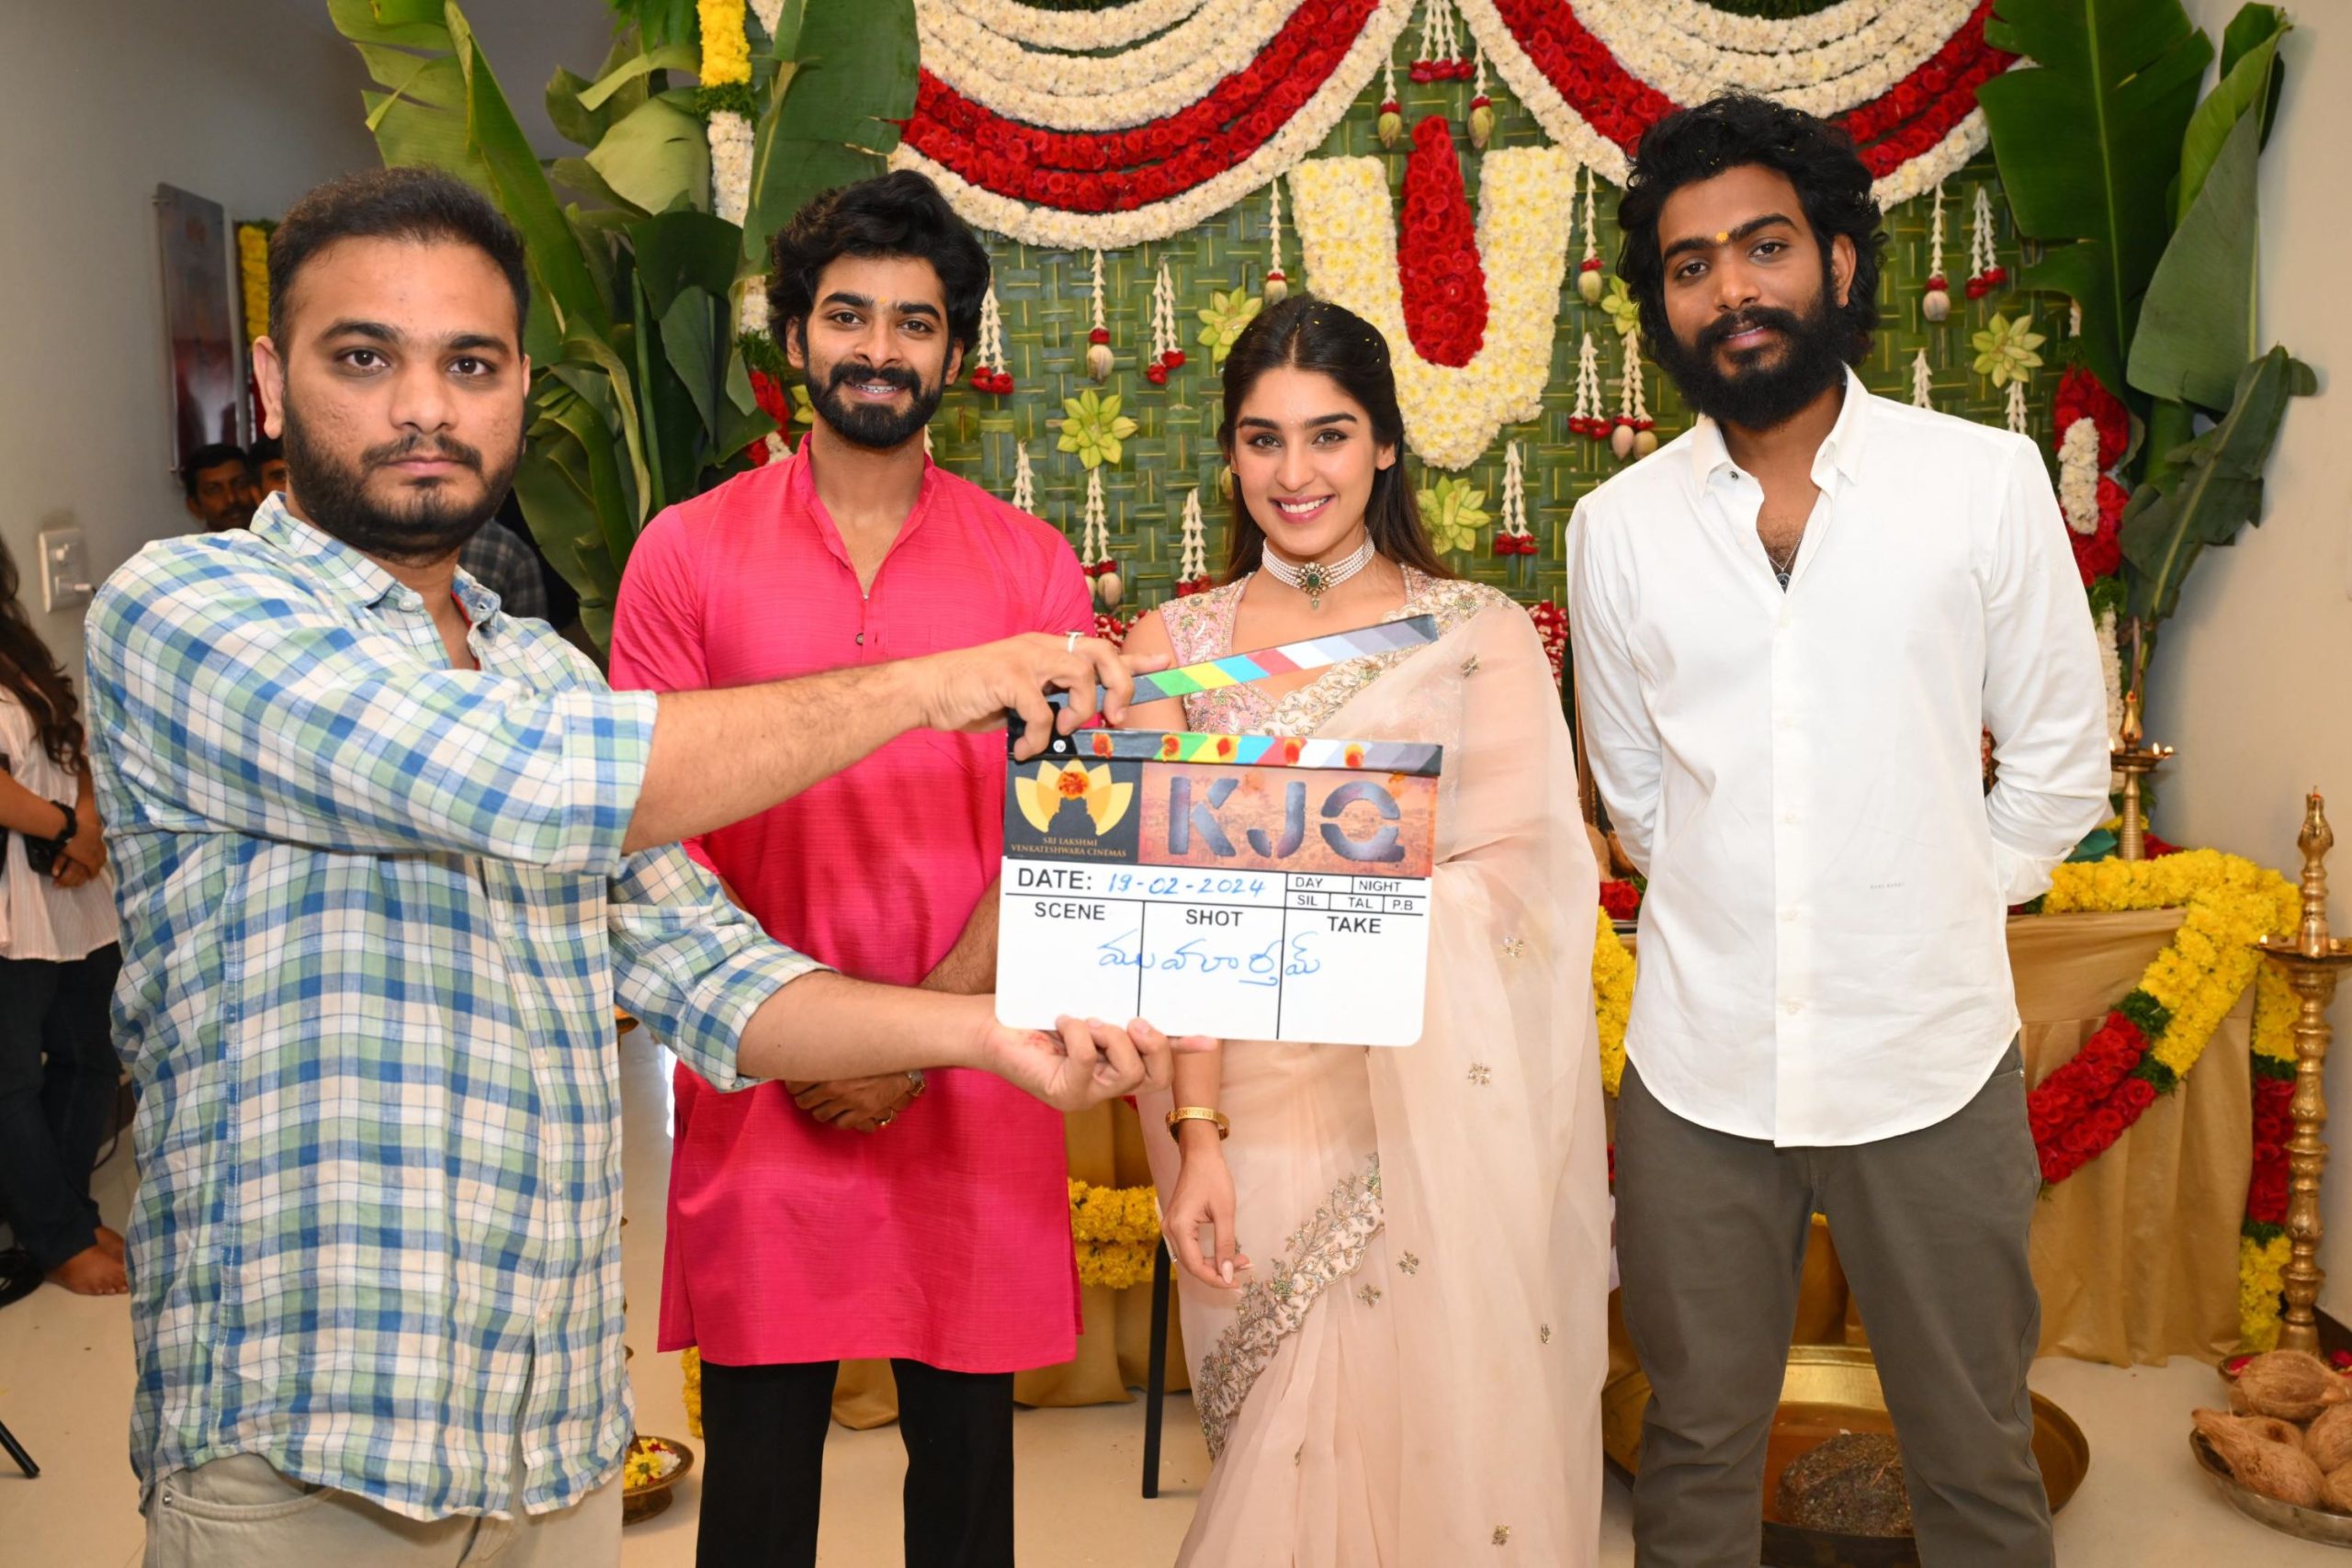 King  Jackie  Queen Movie Launched